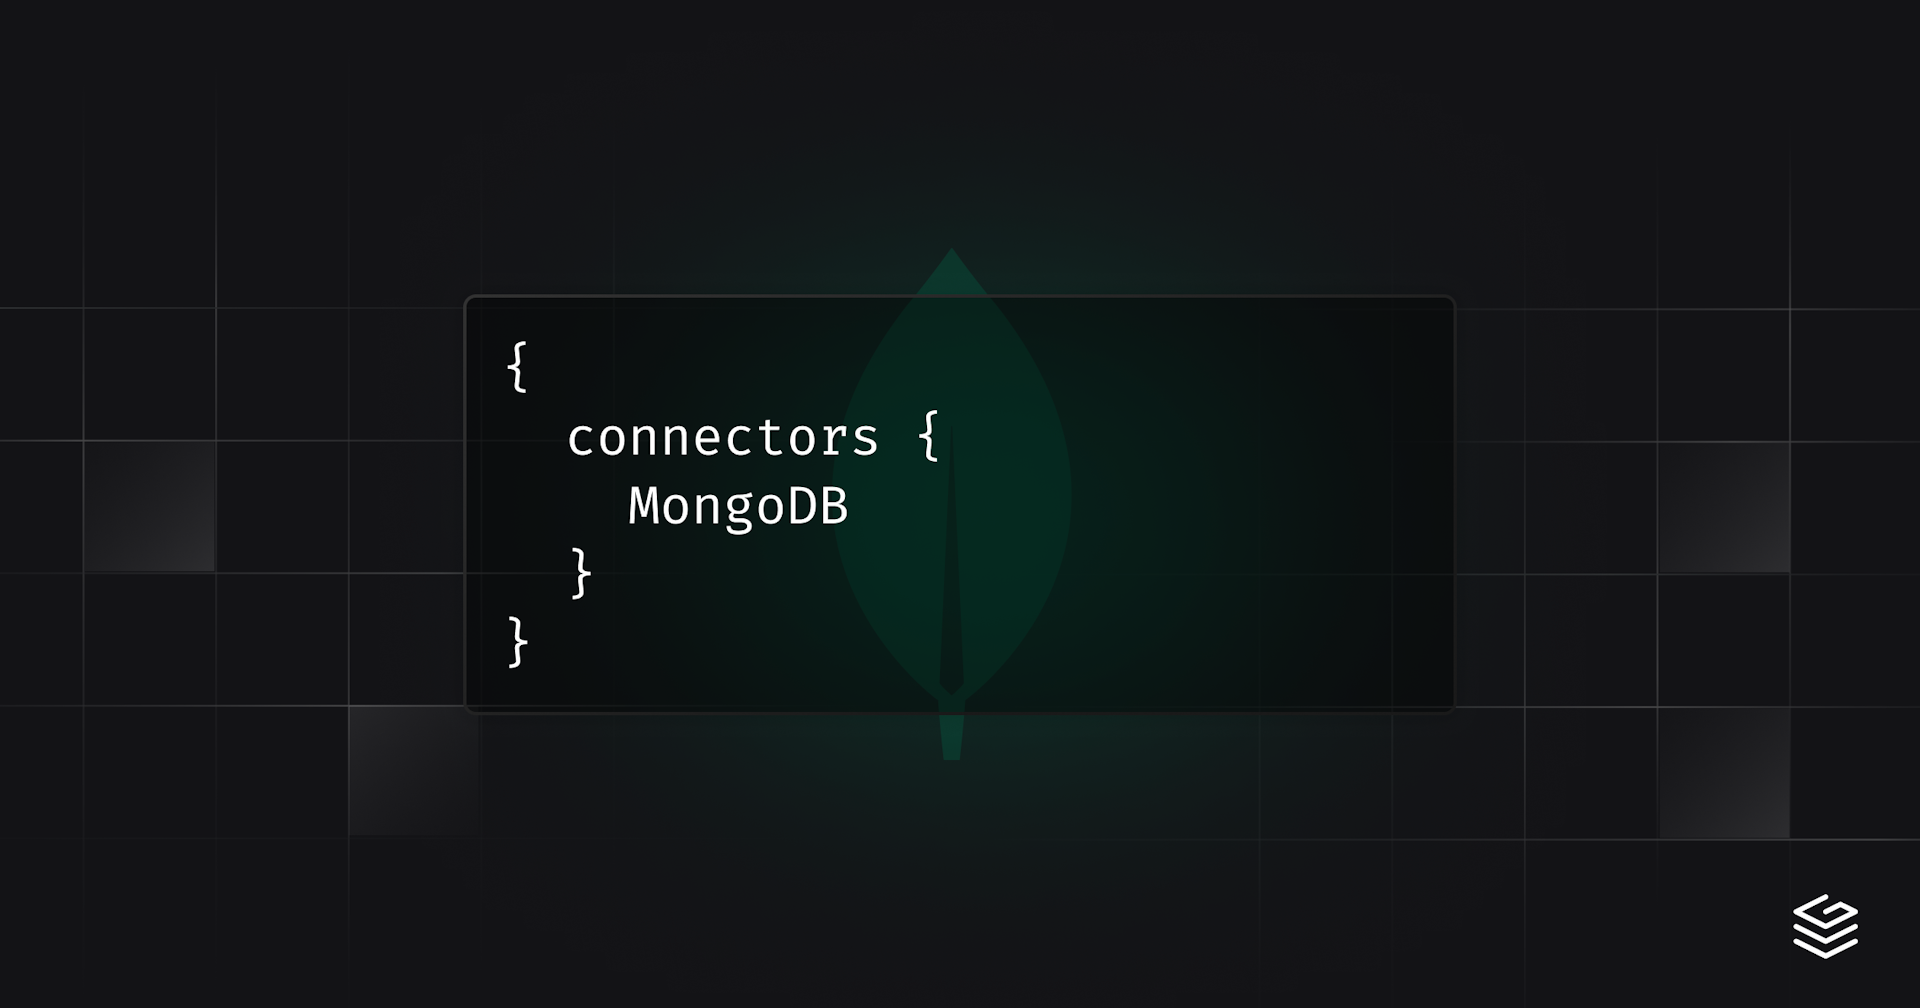 Announcing the MongoDB Connector